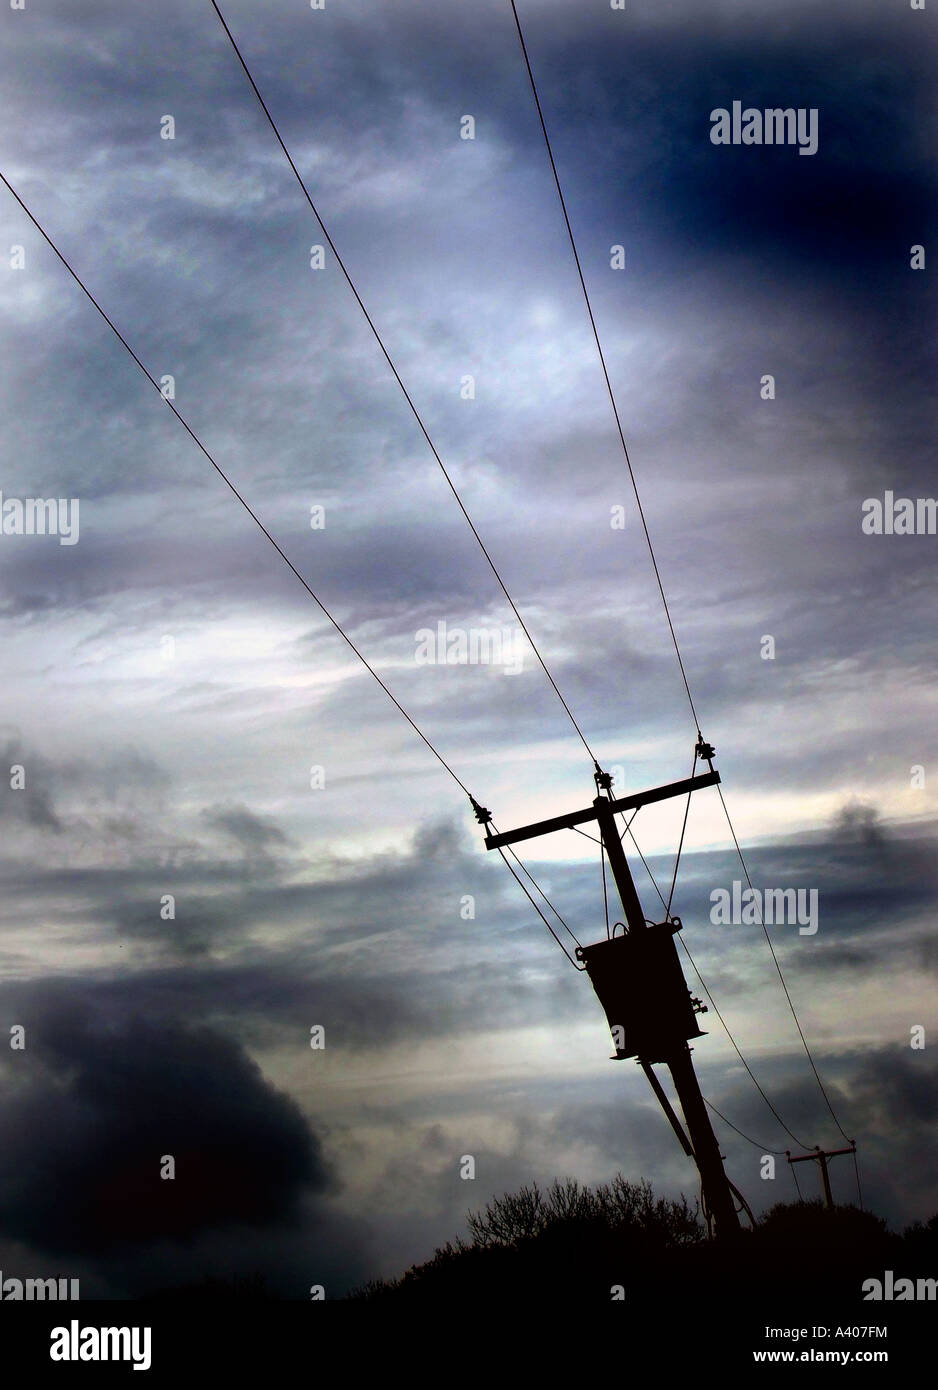 overhead electricity power lines Stock Photo